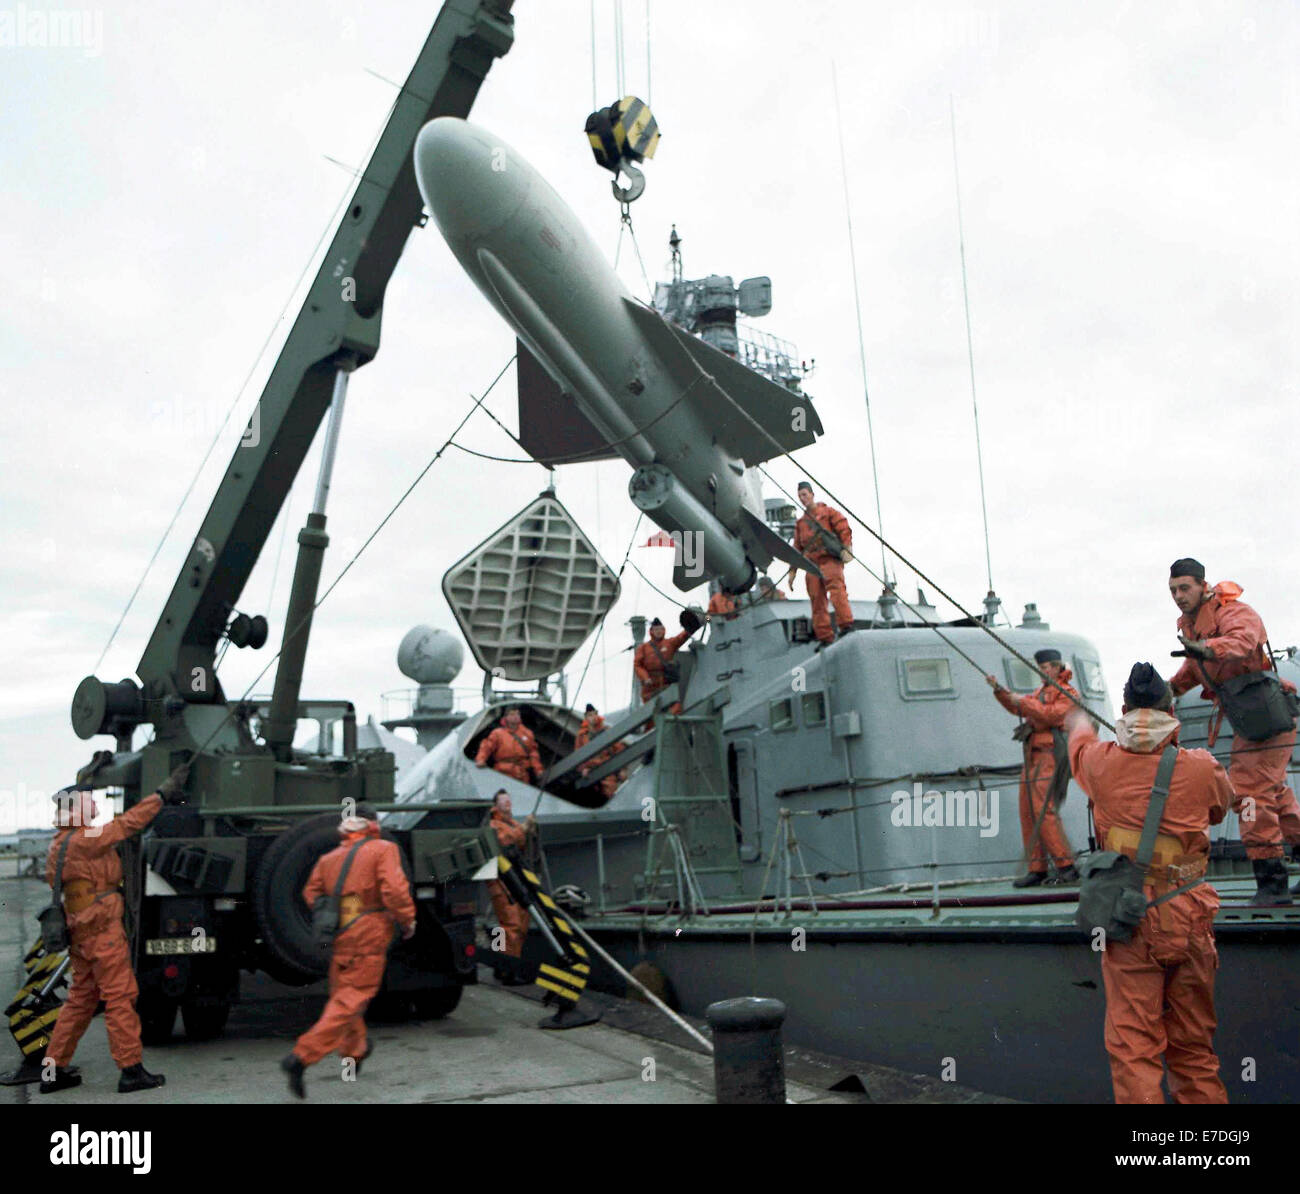 Members of the People's Navy use a self-propelled revolving crane to lift a cruise missile on a missile boat during Brotherhood in Arms 1982 in Rostock. The low-flying type P-15 missile has a range of about 20 nautical miles. Undated from August 1982. Photo: Juergen Sindermann -NO WIRE SERVICE- Stock Photo